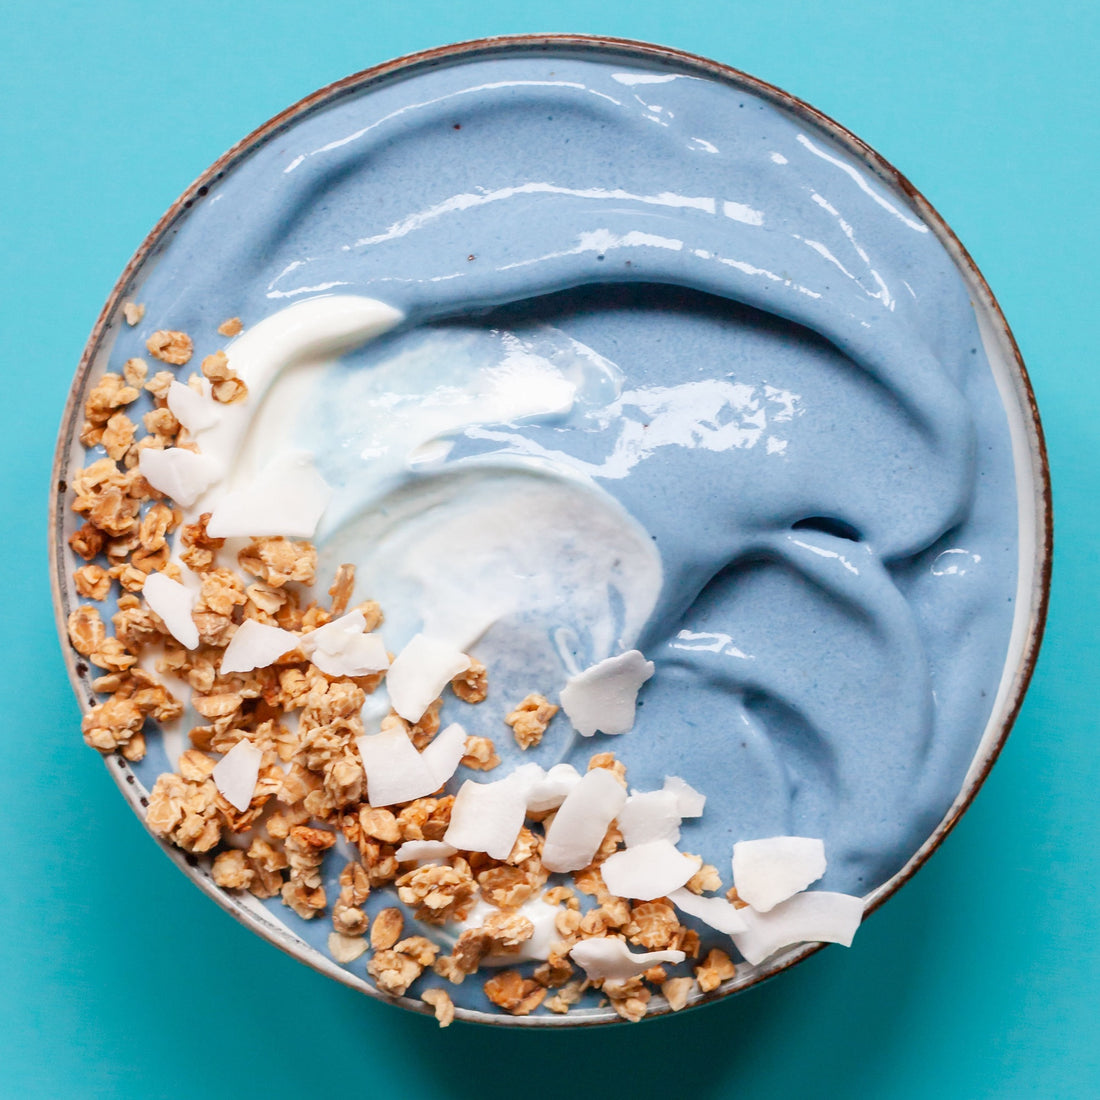 Ocean smoothie bowl to celebrate earth day